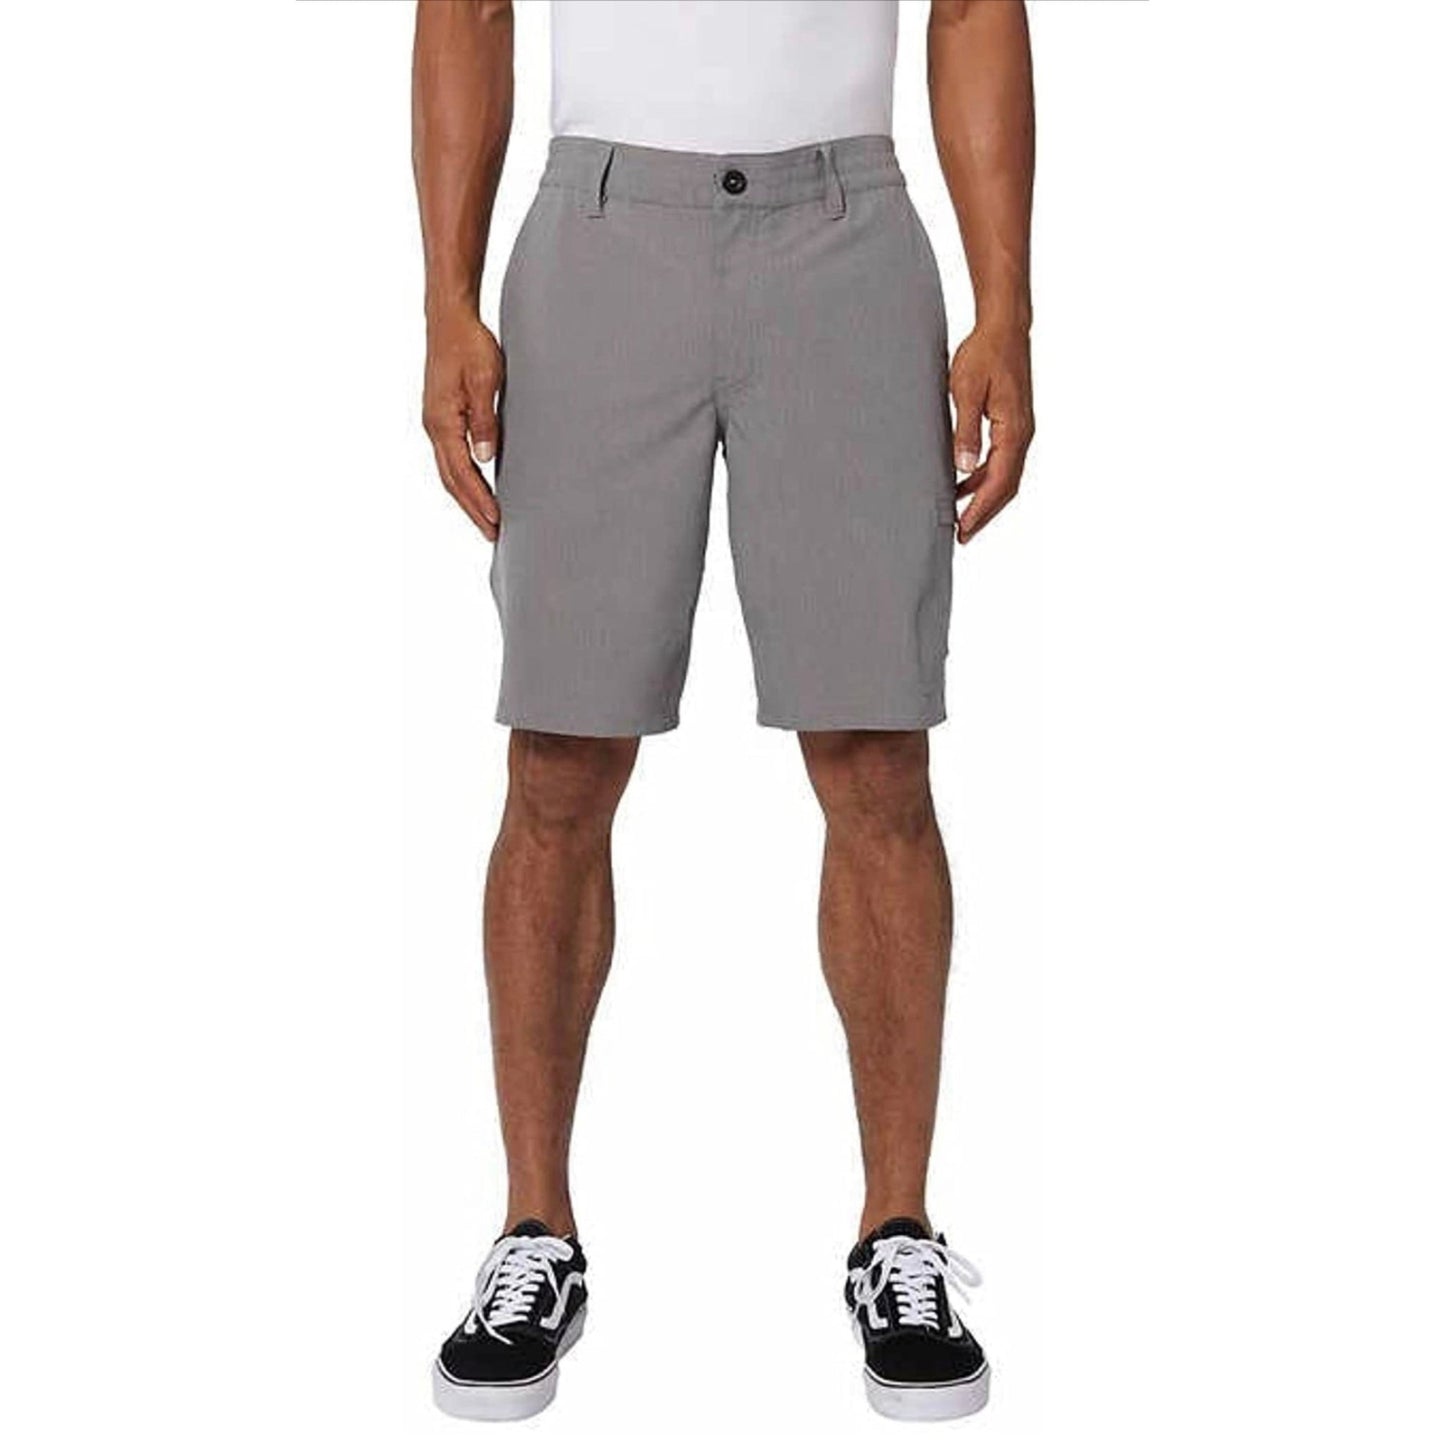 O'Neill Men's Hybrid Cargo Short, 20 Inch Outseam, Charcoal Gray / Curl